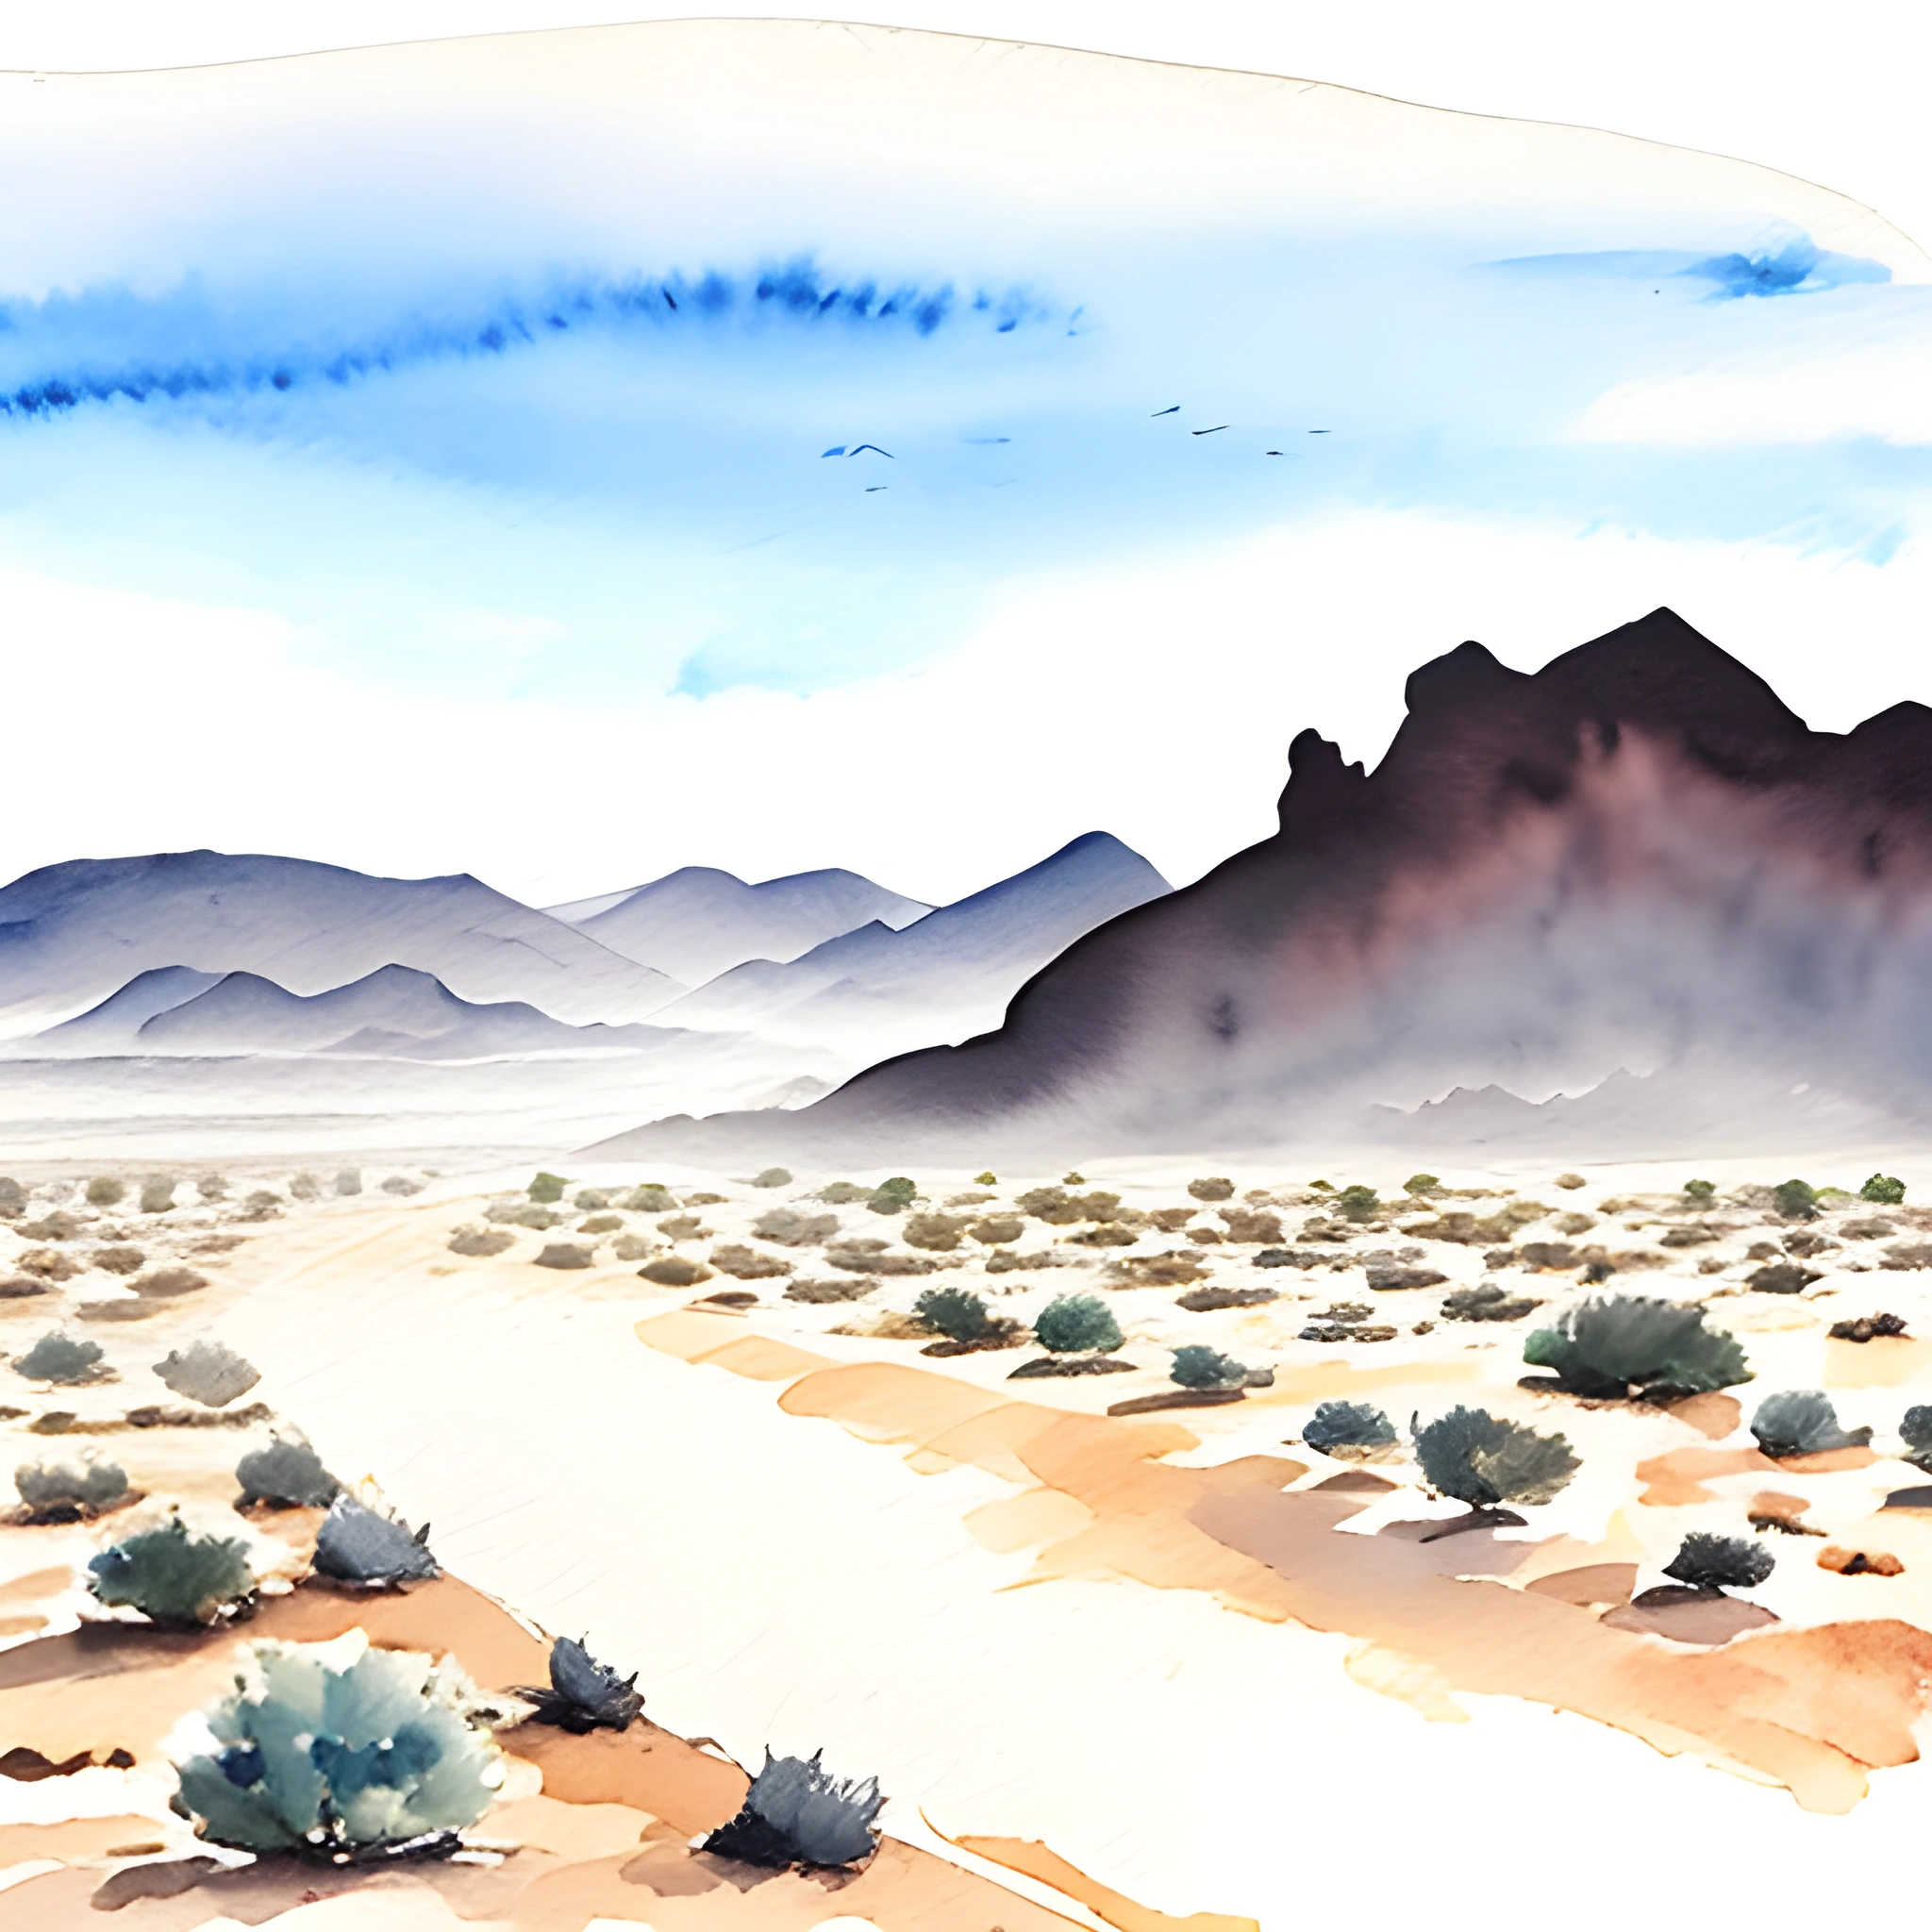 painting of a desert scene with mountains and a blue sky